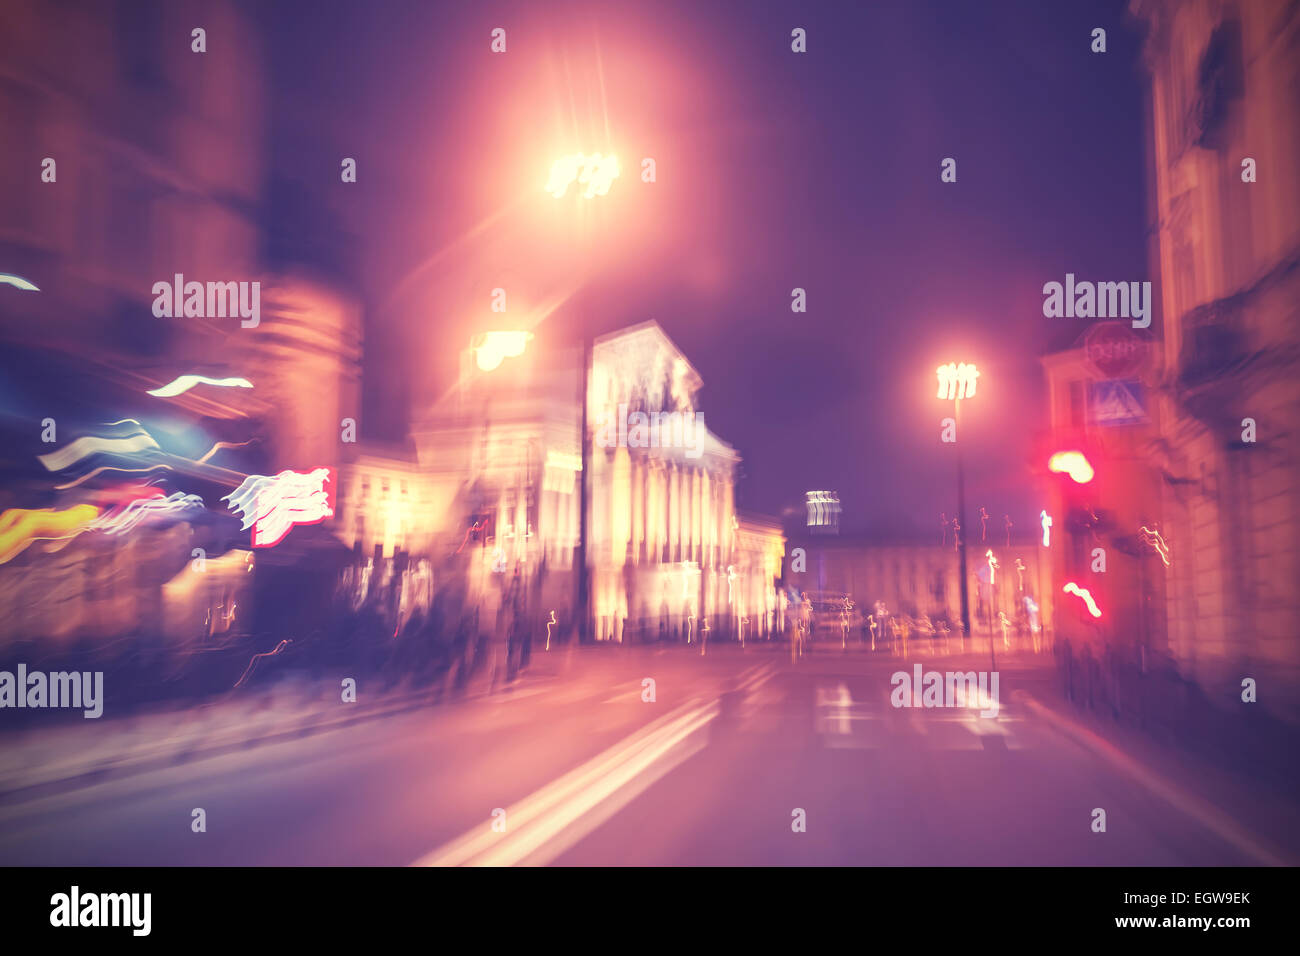 Retro filtered city traffic lights in motion blur. Stock Photo